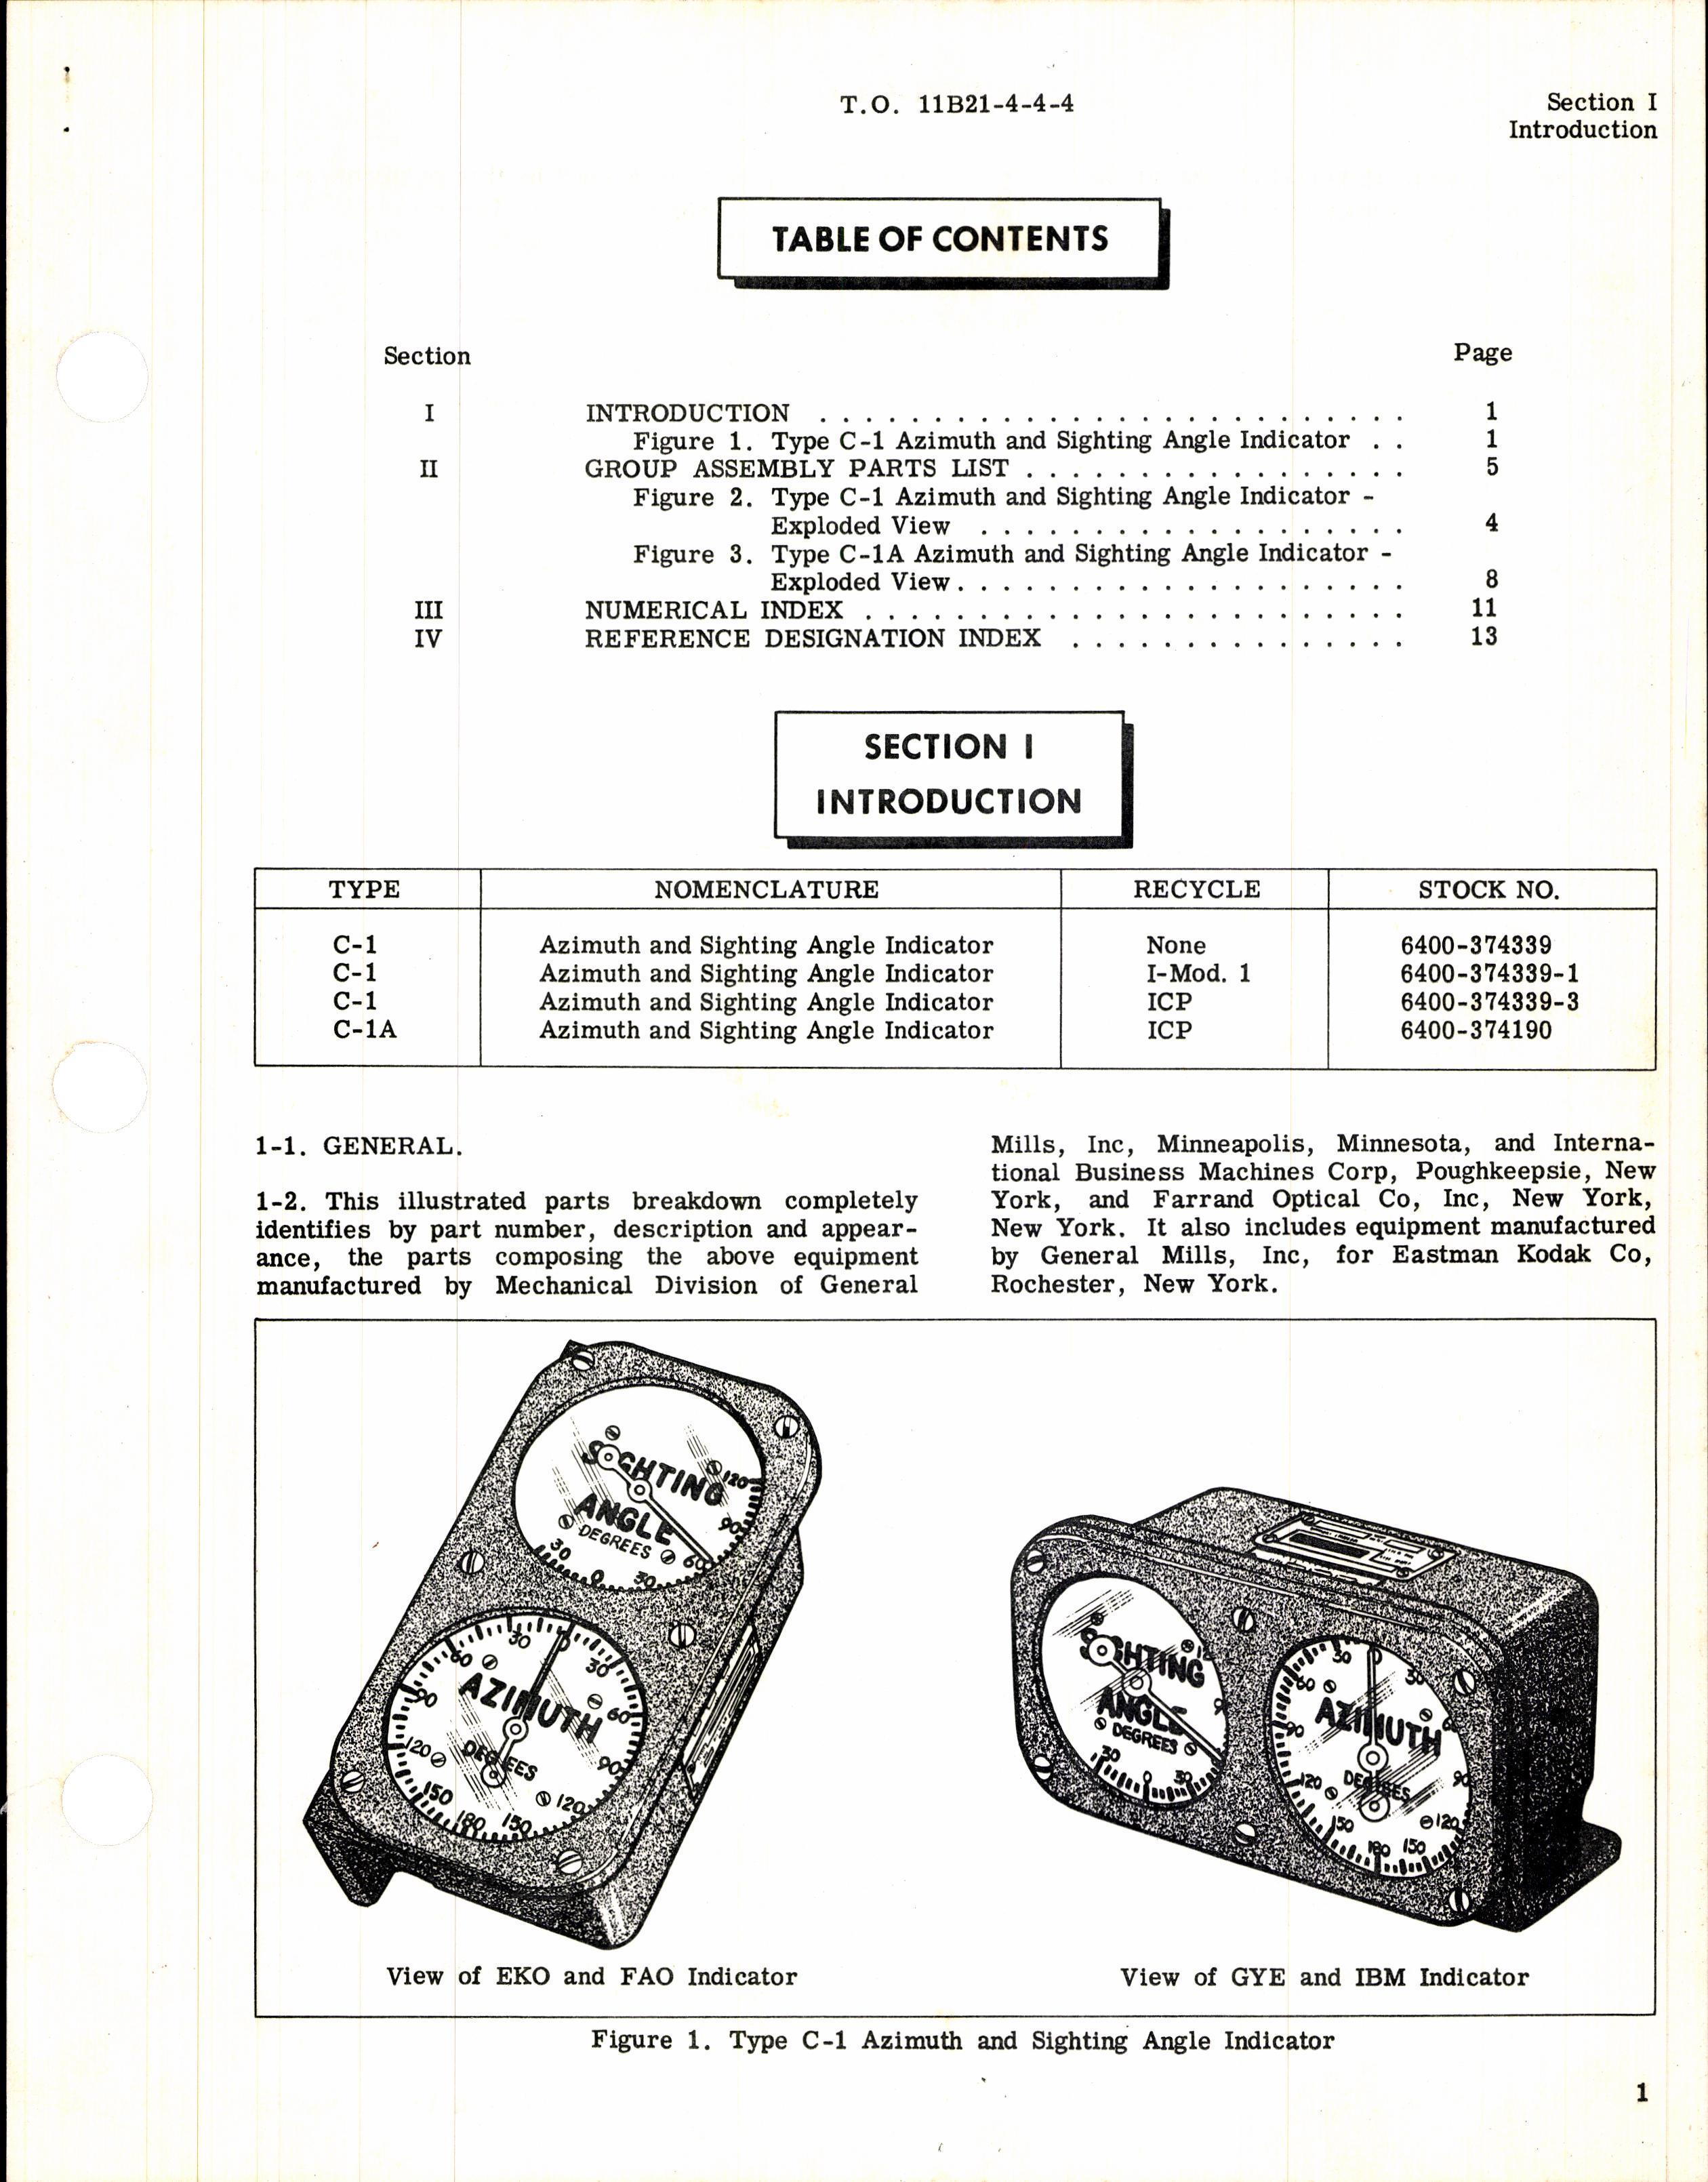 Sample page 3 from AirCorps Library document: Illustrated Parts Breakdown for Type C-1, and C-1A Azimuth and Sighting Angle Indicator